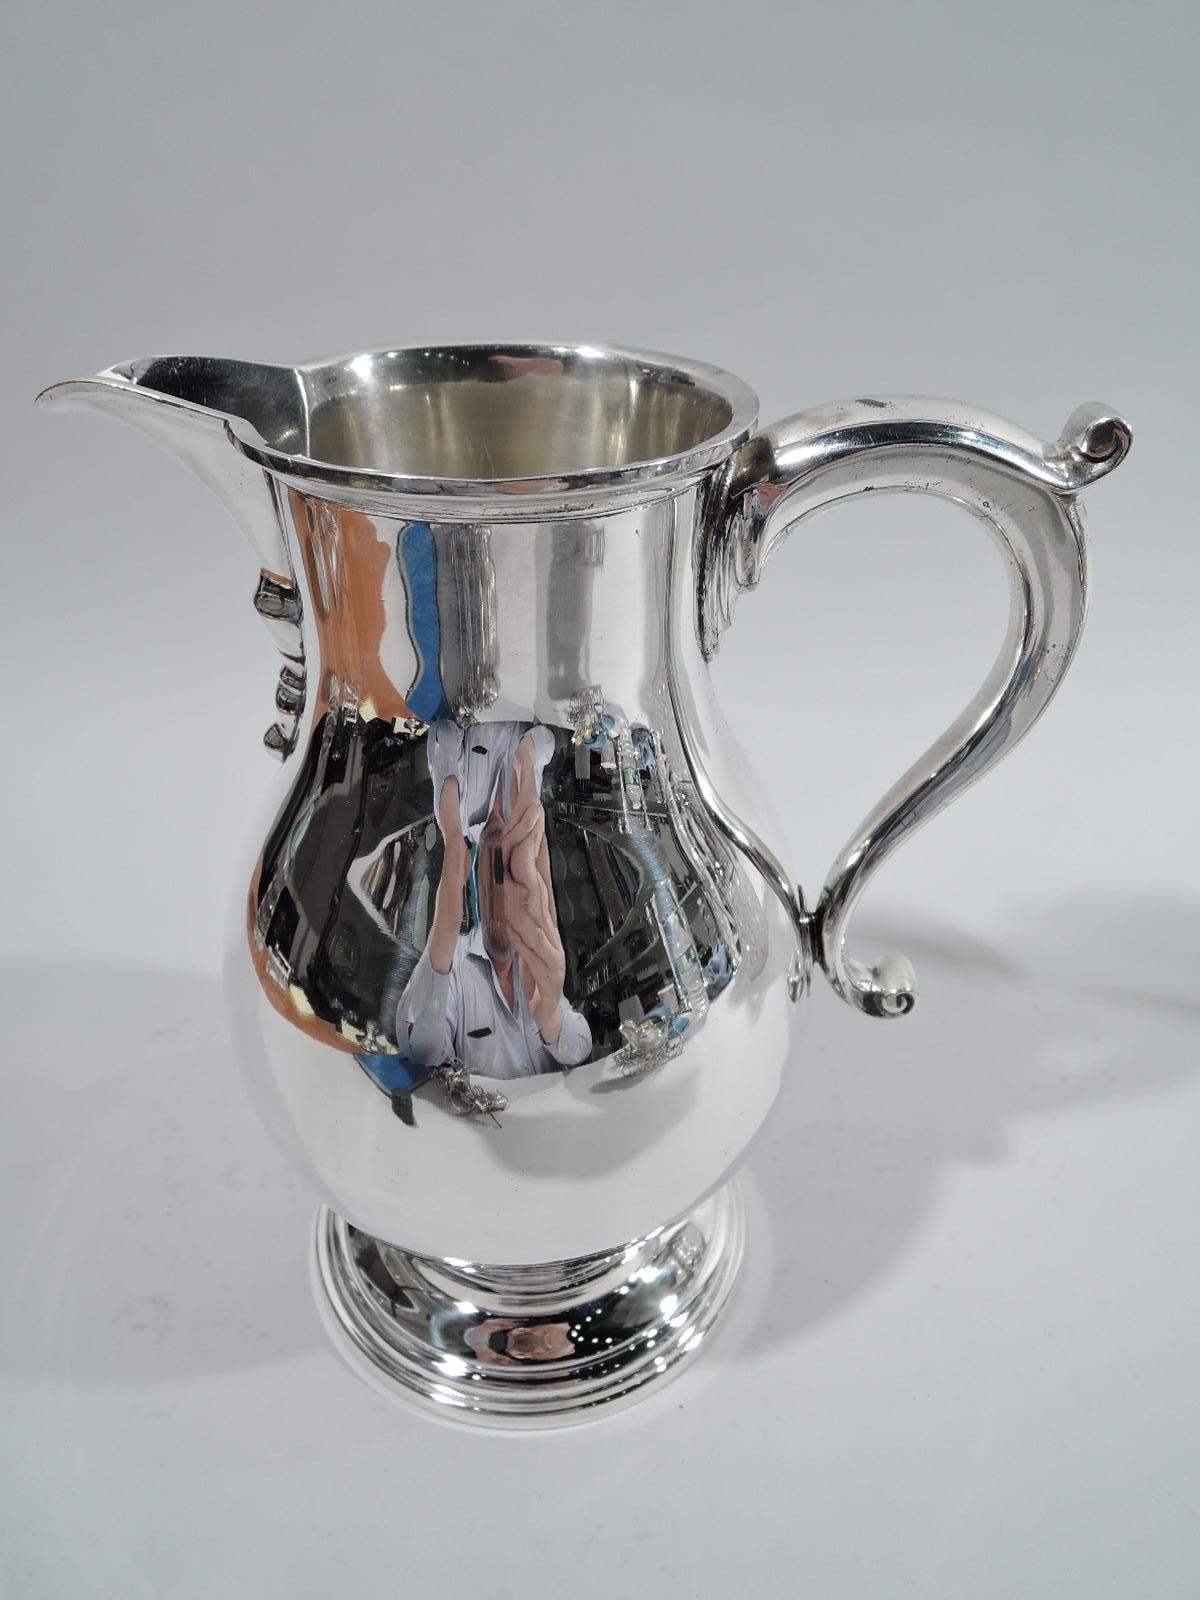 American Colonial-style sterling silver water pitcher, ca 1920. Retailed by Tiffany & Co. in New York. Baluster body with capped scroll handle and v-spout with base ornament, and stepped and round foot. Holds 2 3/4 pints. Marked “Tiffany & Co. /